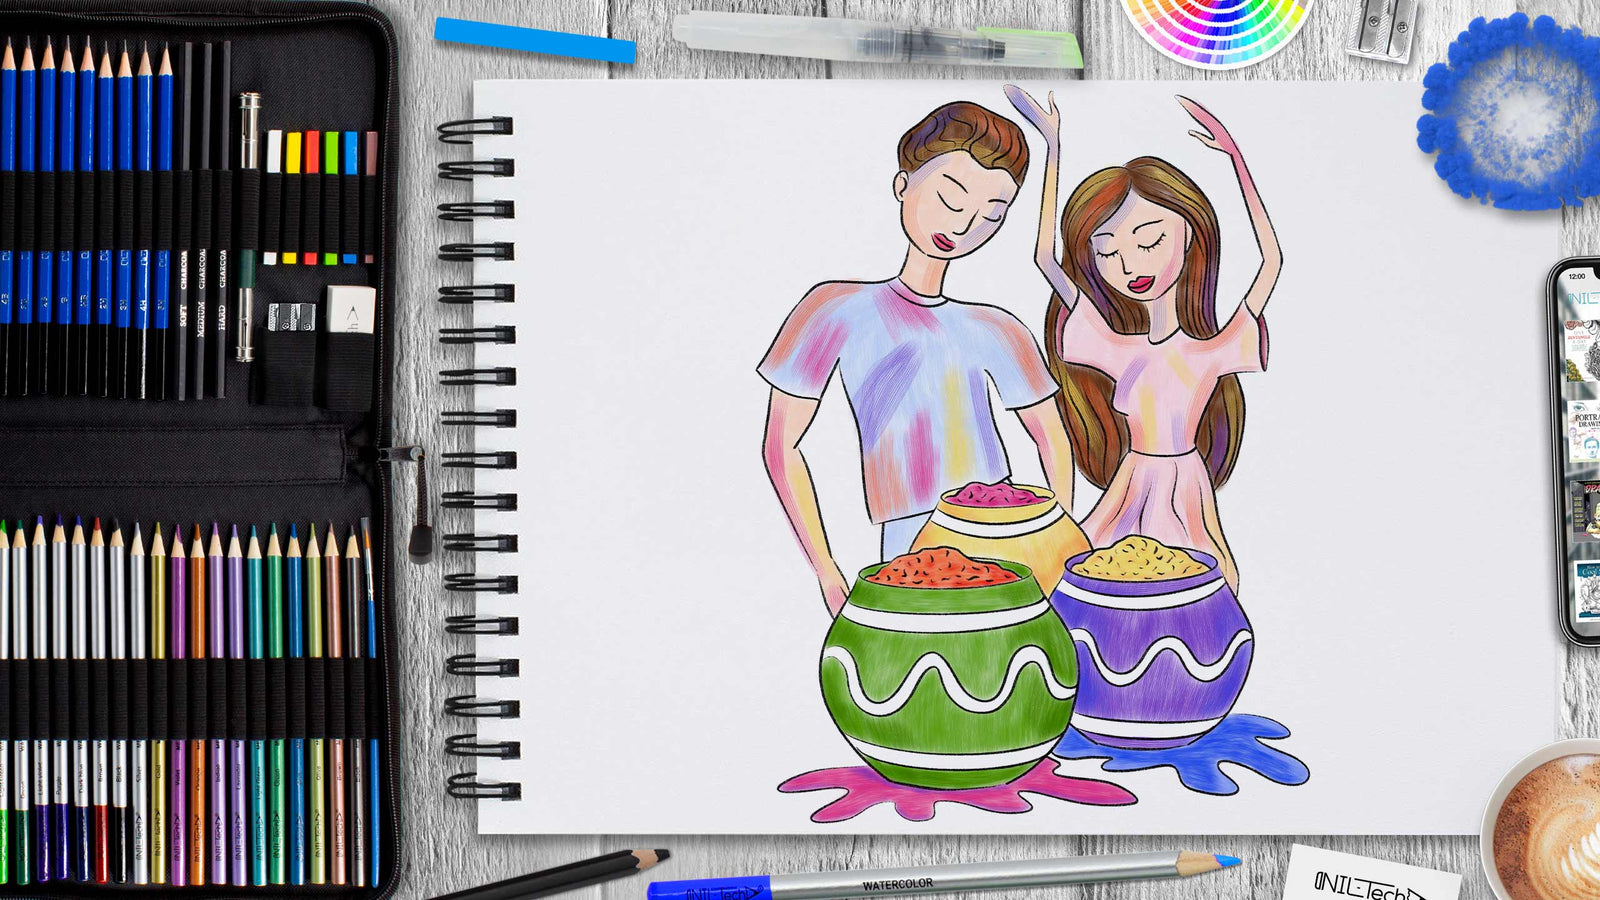 Happy Holi PNG Image, Illustration Of Colorful Happy Holi Label, Holi  Drawing, Holi Sketch, Happy Holi PNG Image For Free Download